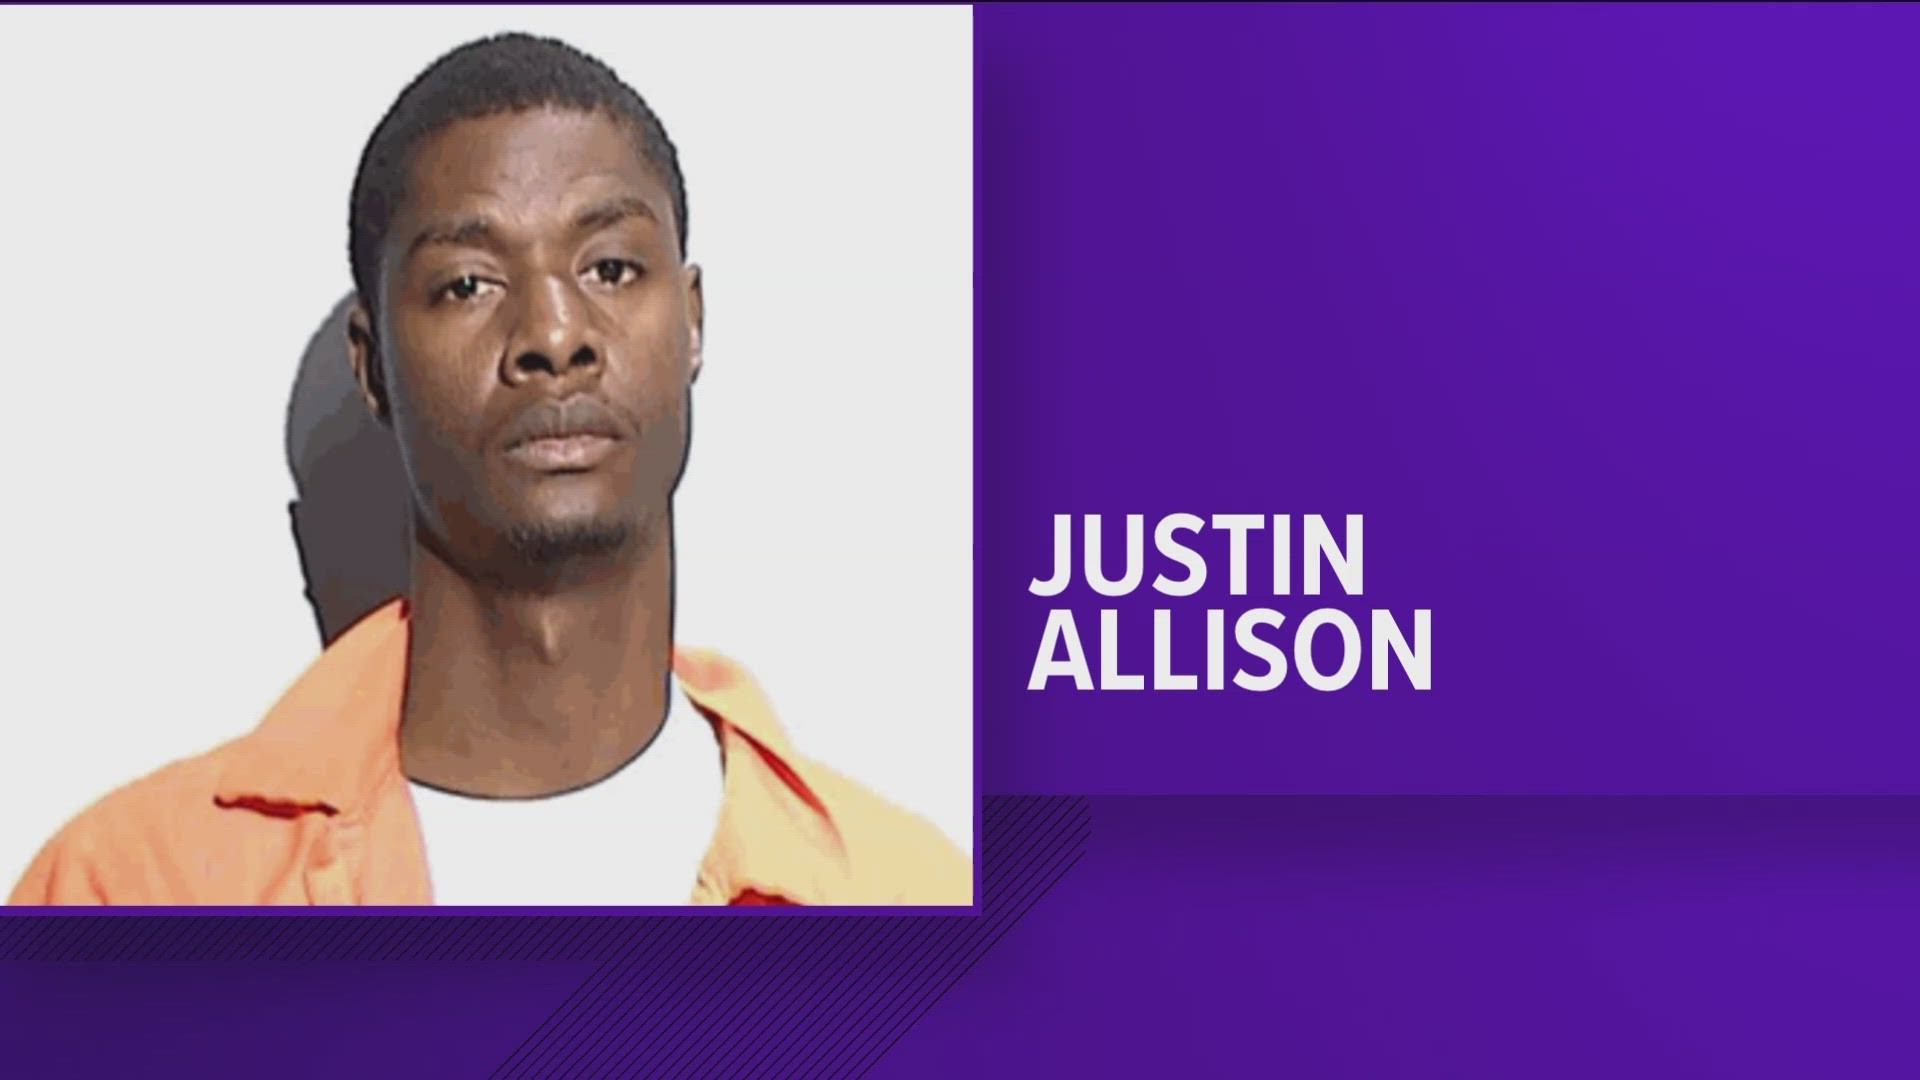 A Lucas County judge on Wednesday sentenced Justin Allison to life in prison with possibility of parole after 15 years for the murder of Charles Marshall.